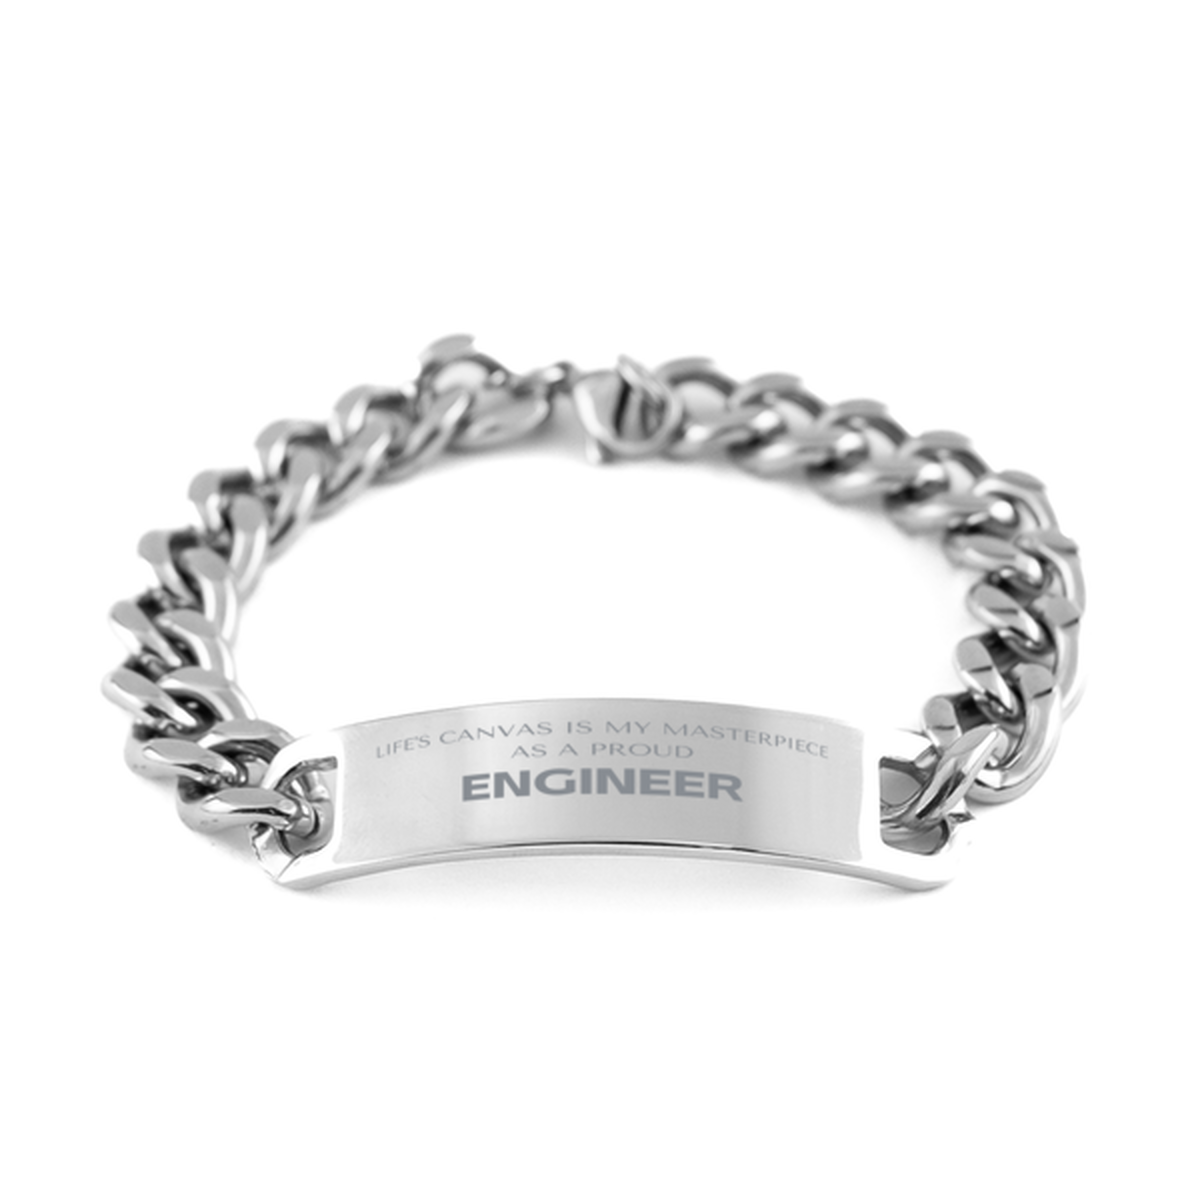 Proud Engineer Gifts, Life's canvas is my masterpiece, Epic Birthday Christmas Unique Cuban Chain Stainless Steel Bracelet For Engineer, Coworkers, Men, Women, Friends